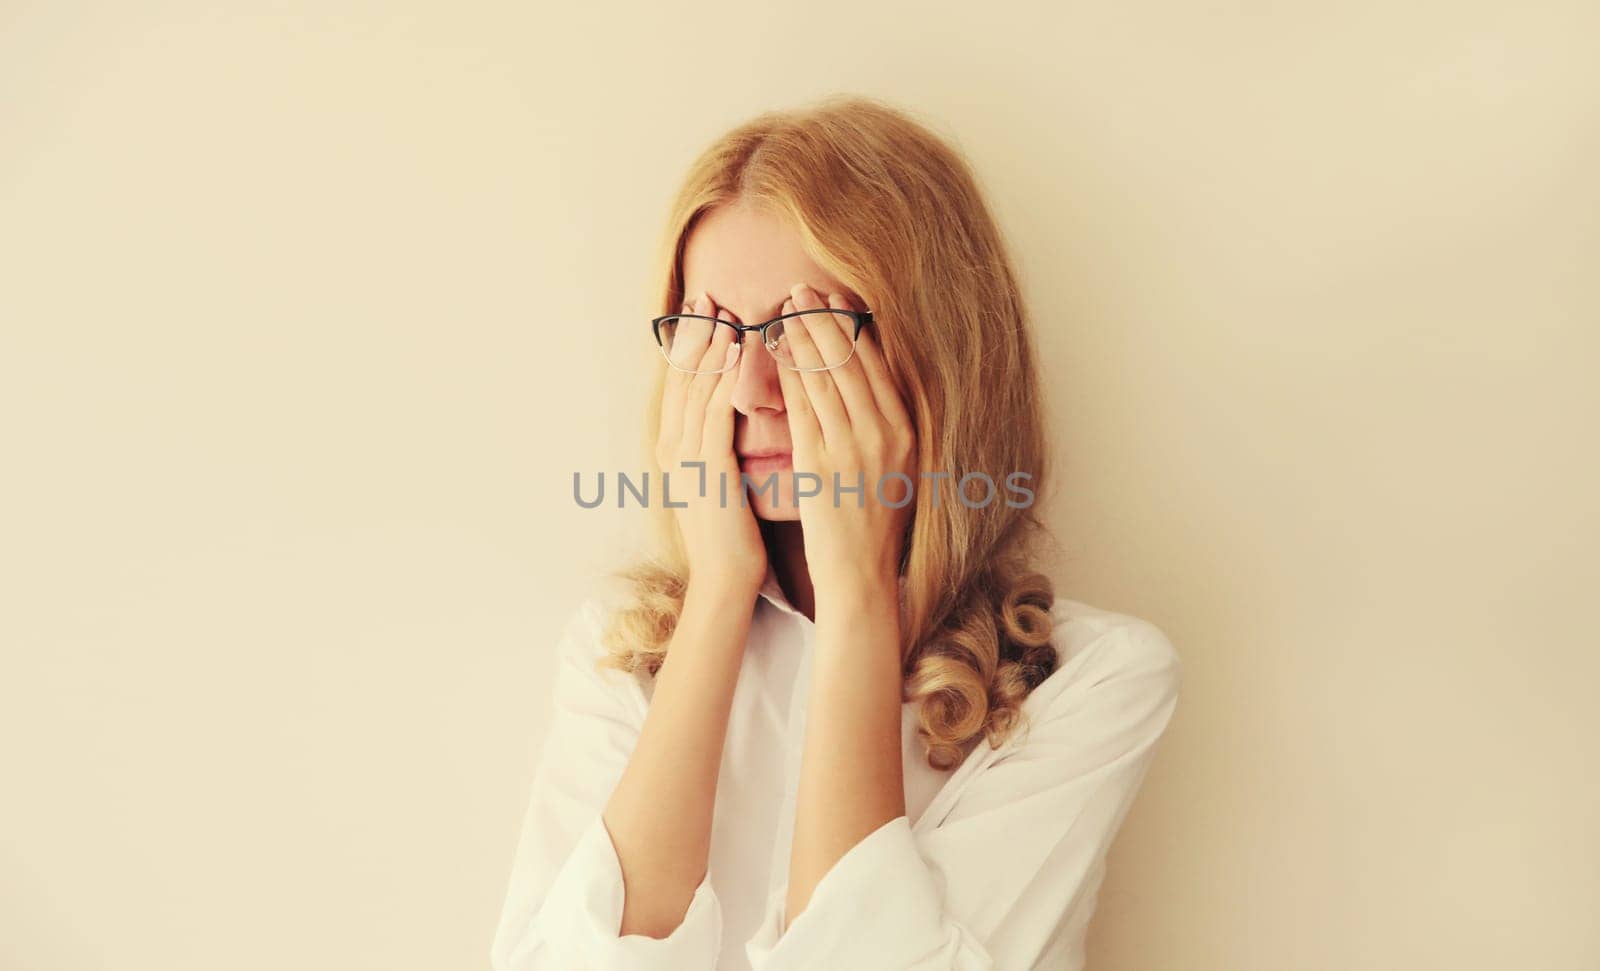 Tired overworked young woman employee rubbing her eyes suffering from eye strain or headaches after working at computer. Exhausted office worker